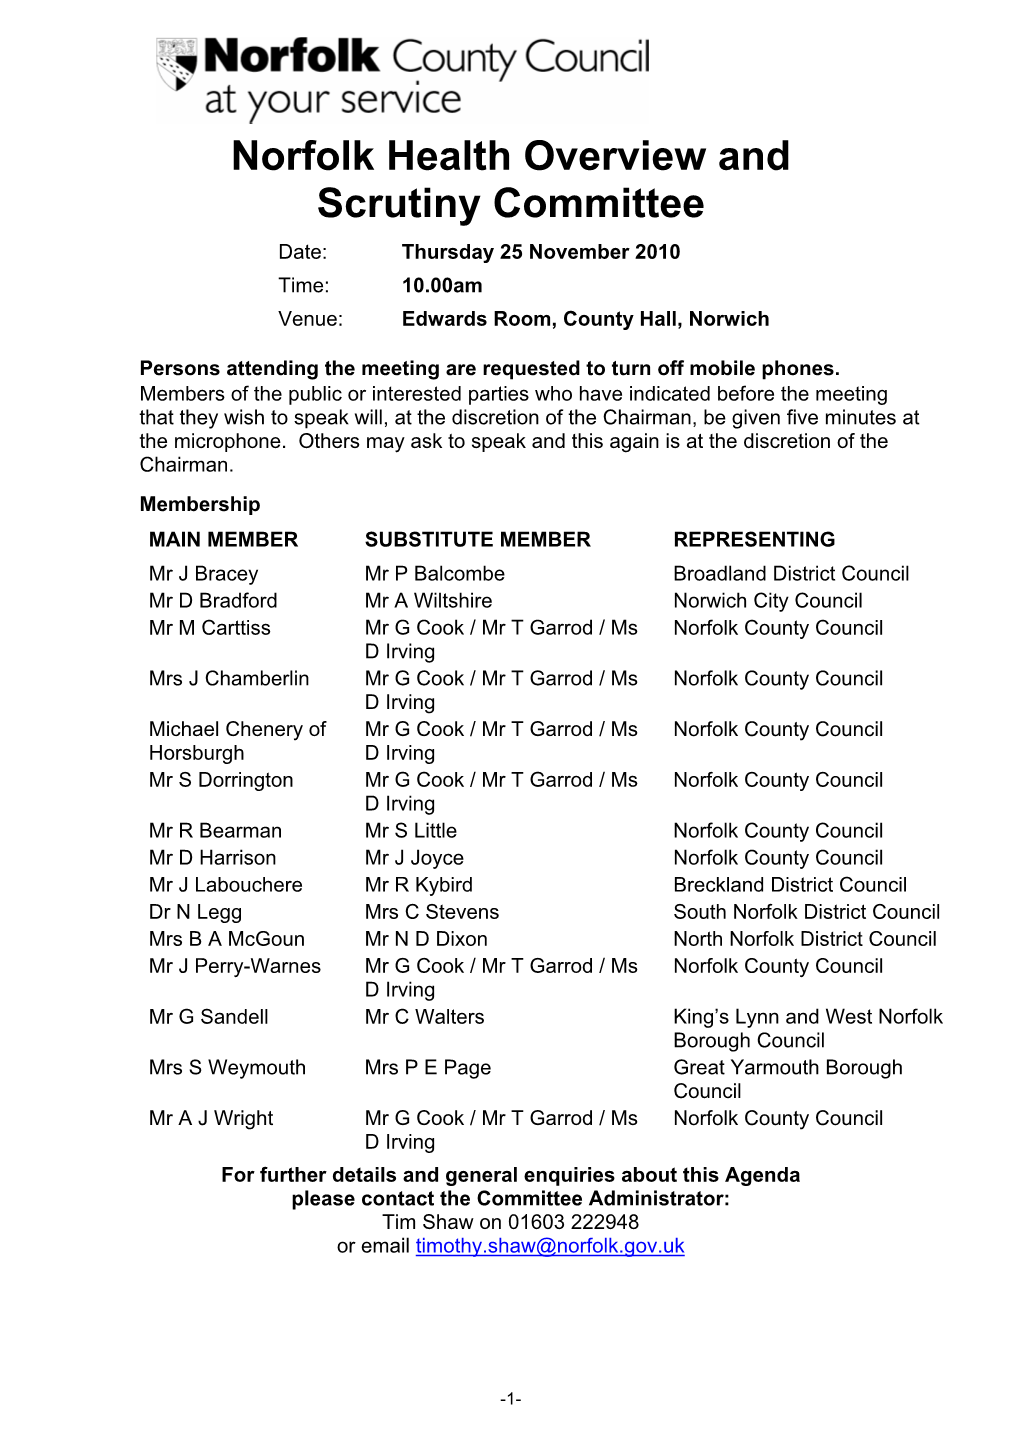 Norfolk Health Overview and Scrutiny Committee Date: Thursday 25 November 2010 Time: 10.00Am Venue: Edwards Room, County Hall, Norwich